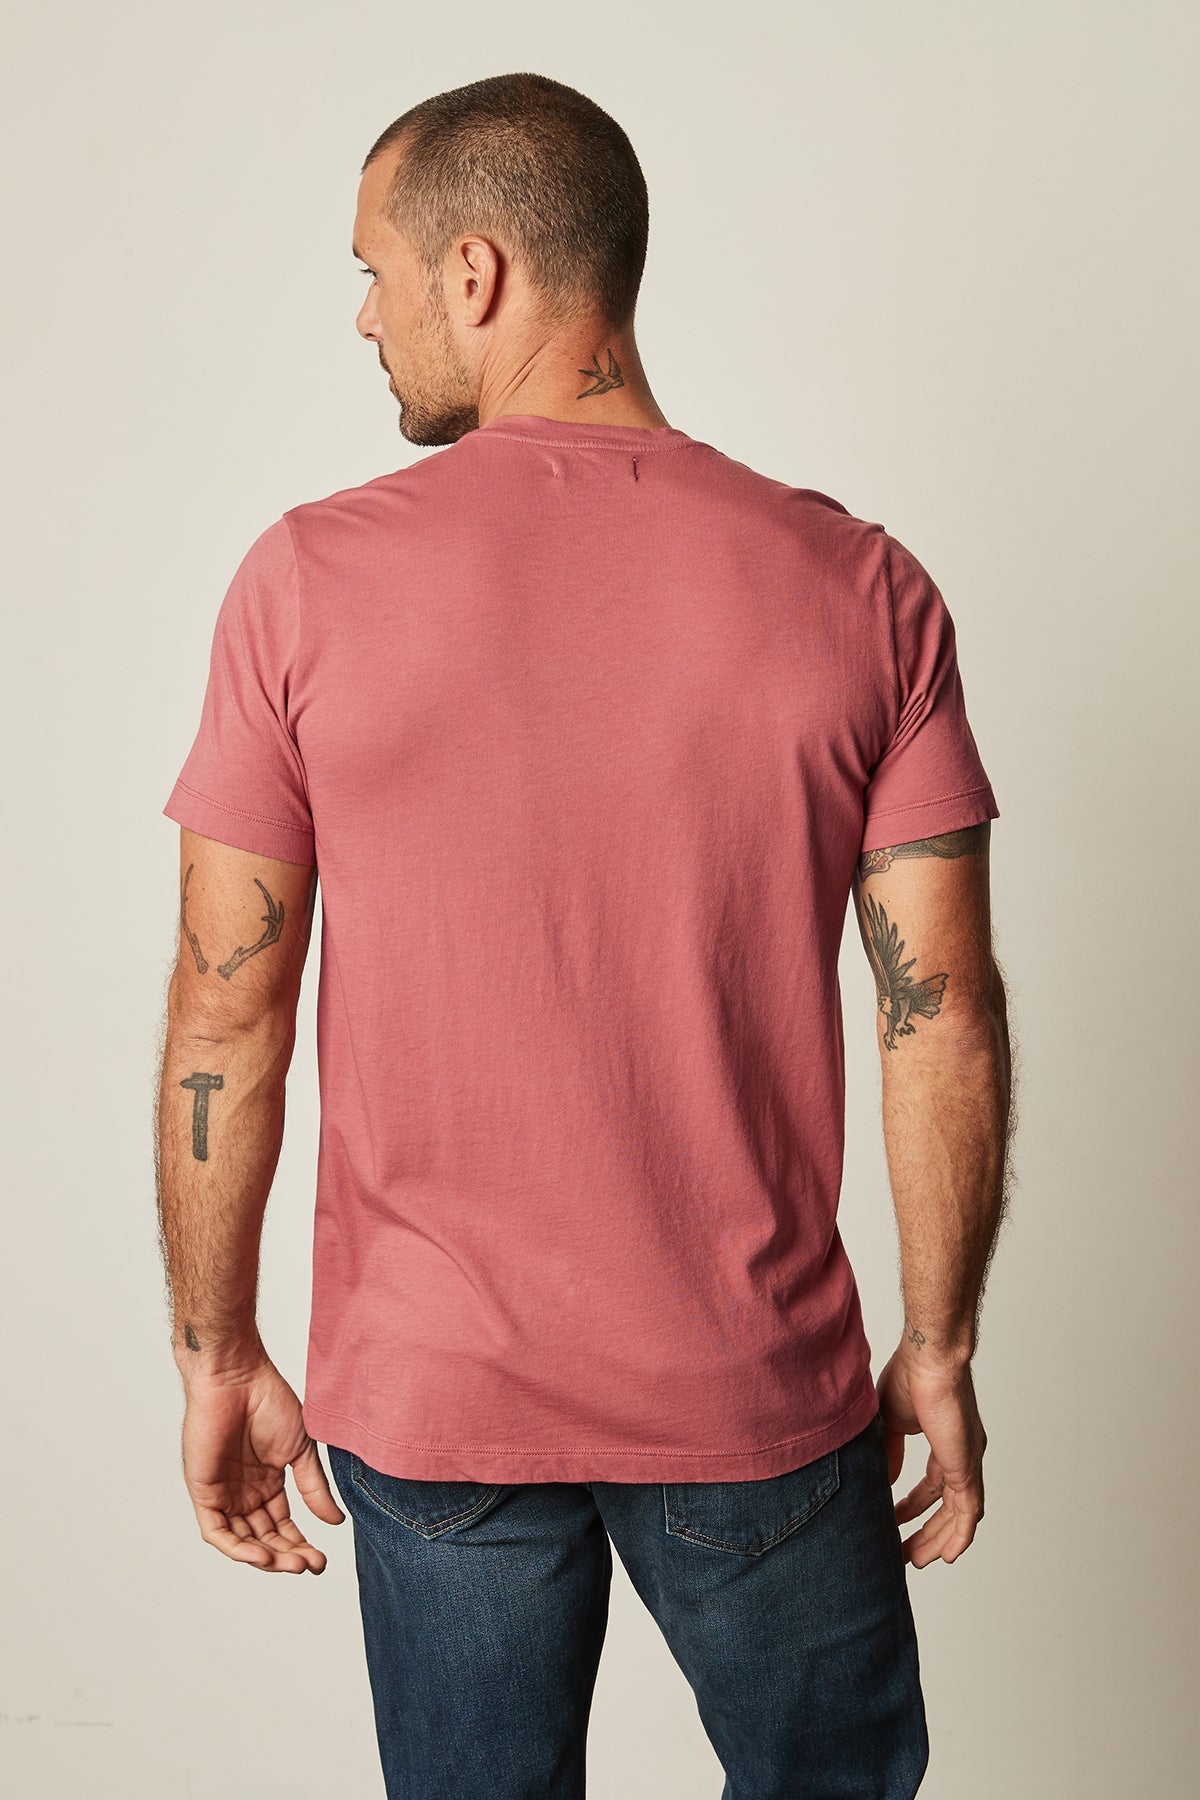 The best-selling vintage-feel softness of the HOWARD WHISPER CLASSIC CREW NECK TEE by Velvet by Graham & Spencer is shown in the back view of a man.-25793661468865